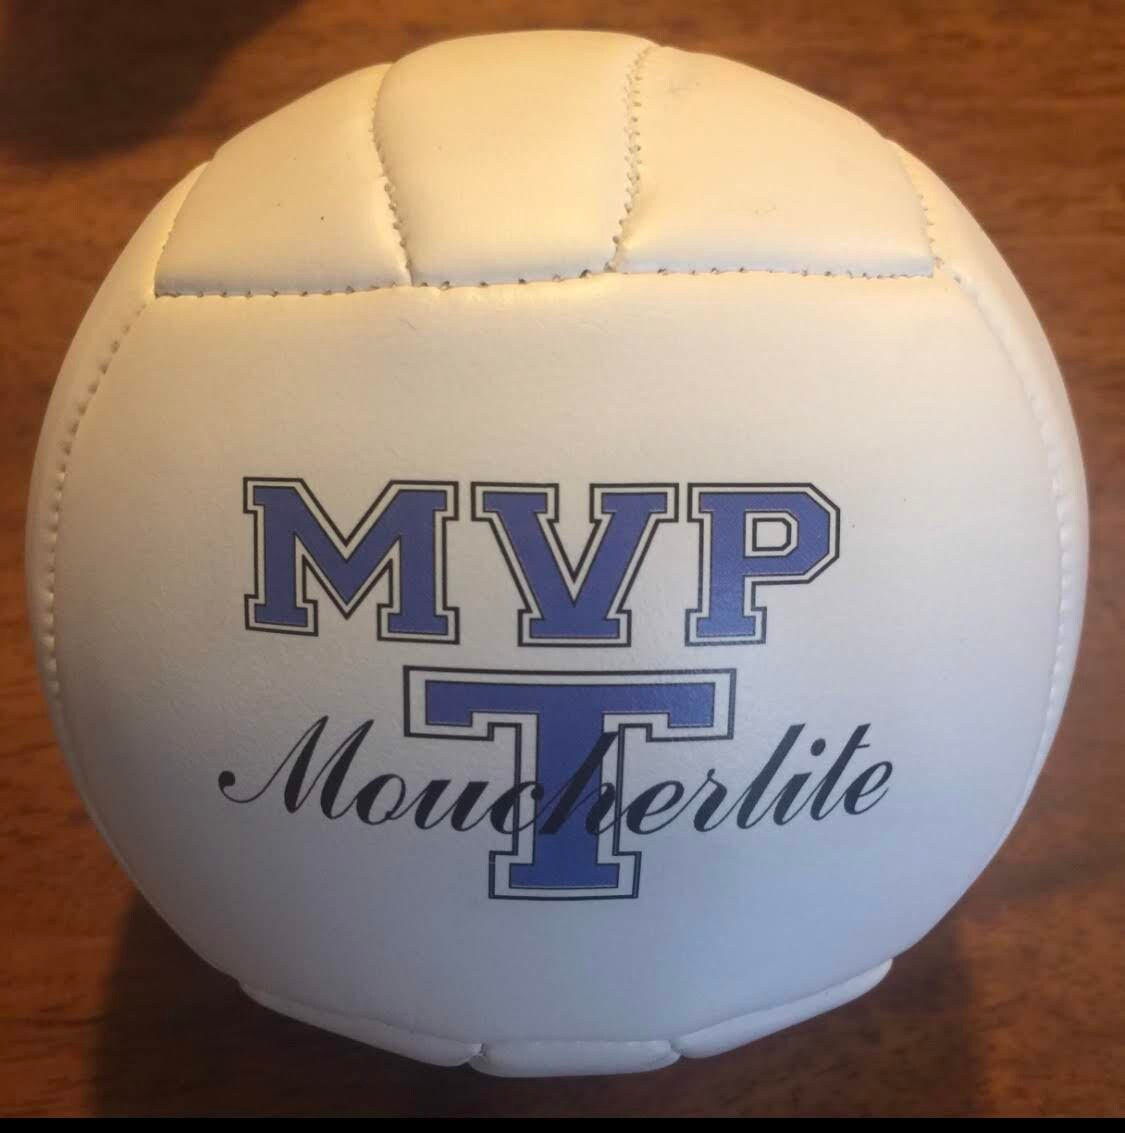 Personalized Custom Mini Volleyballs for Coaches' Gifts, Senior Gifts, Team Awards, Sponsor Gifts, and Volleyball Player Gifts